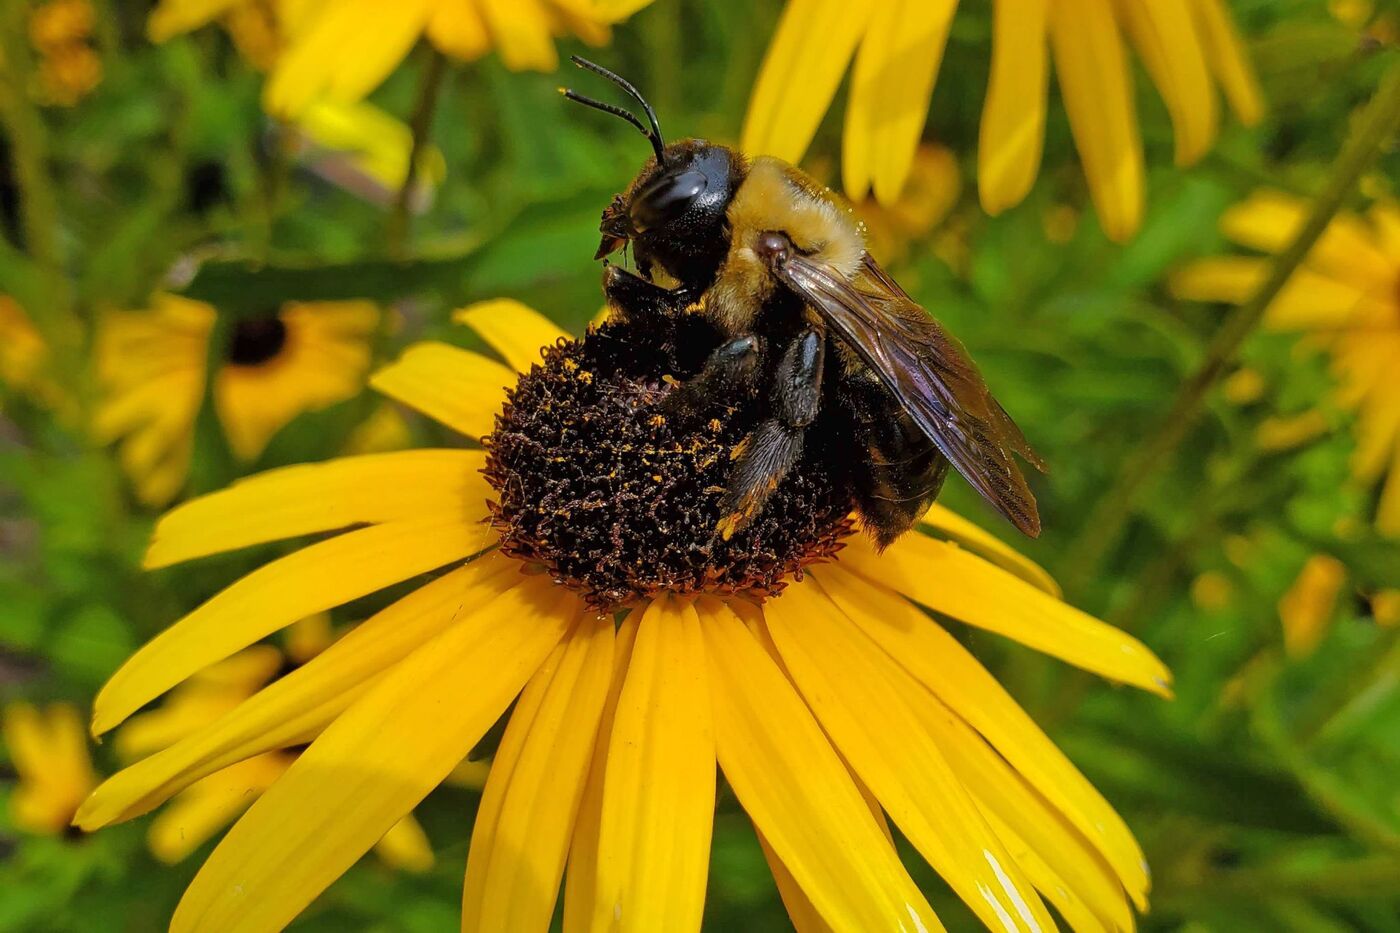 A close-up of a large black and yellow bee perched on the brown center of a flower. Yellow petals droop down around the center of the flower.